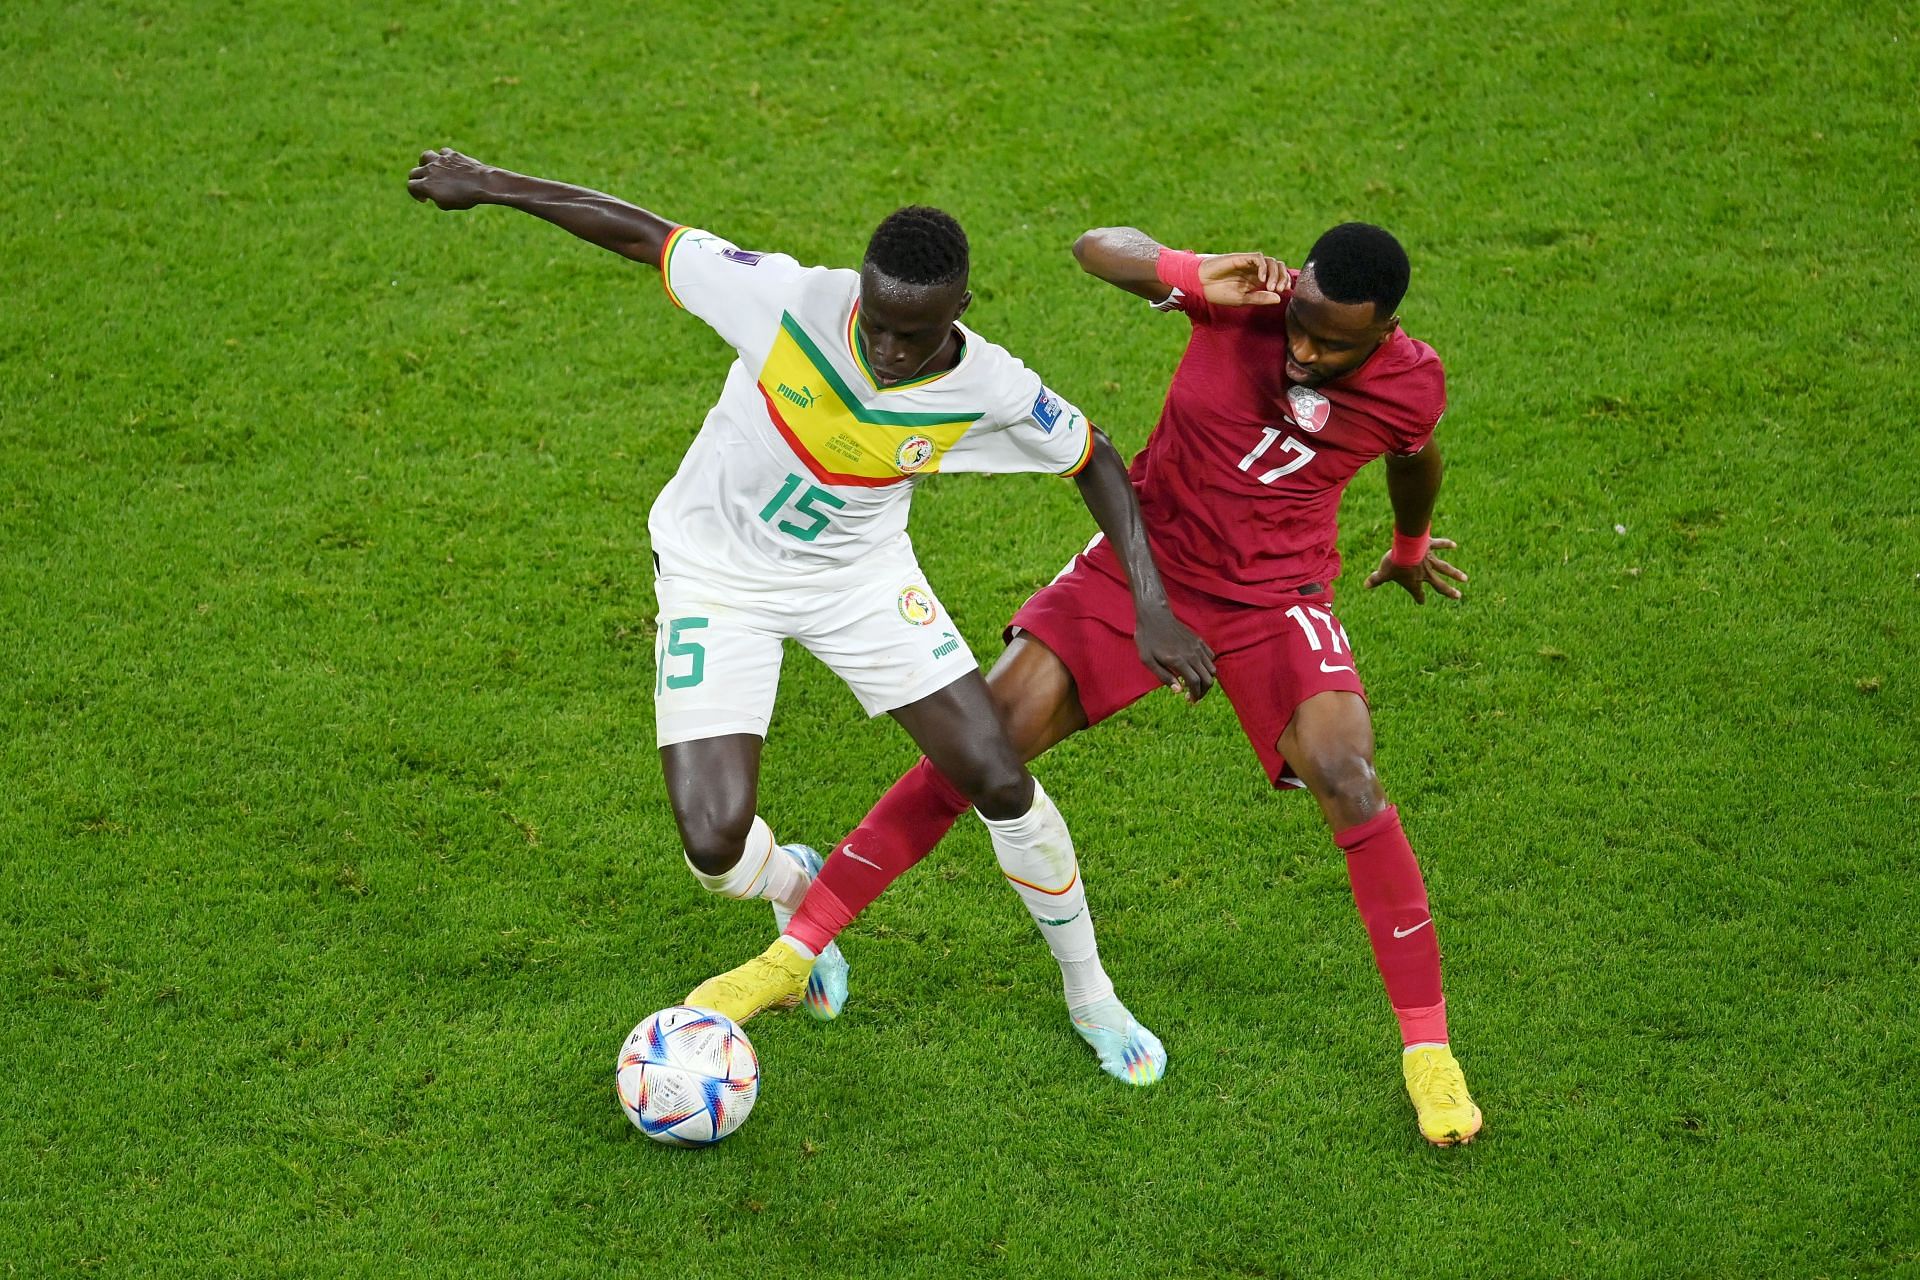 Krepin Diatta battles for possession with Ismael Mohamad.